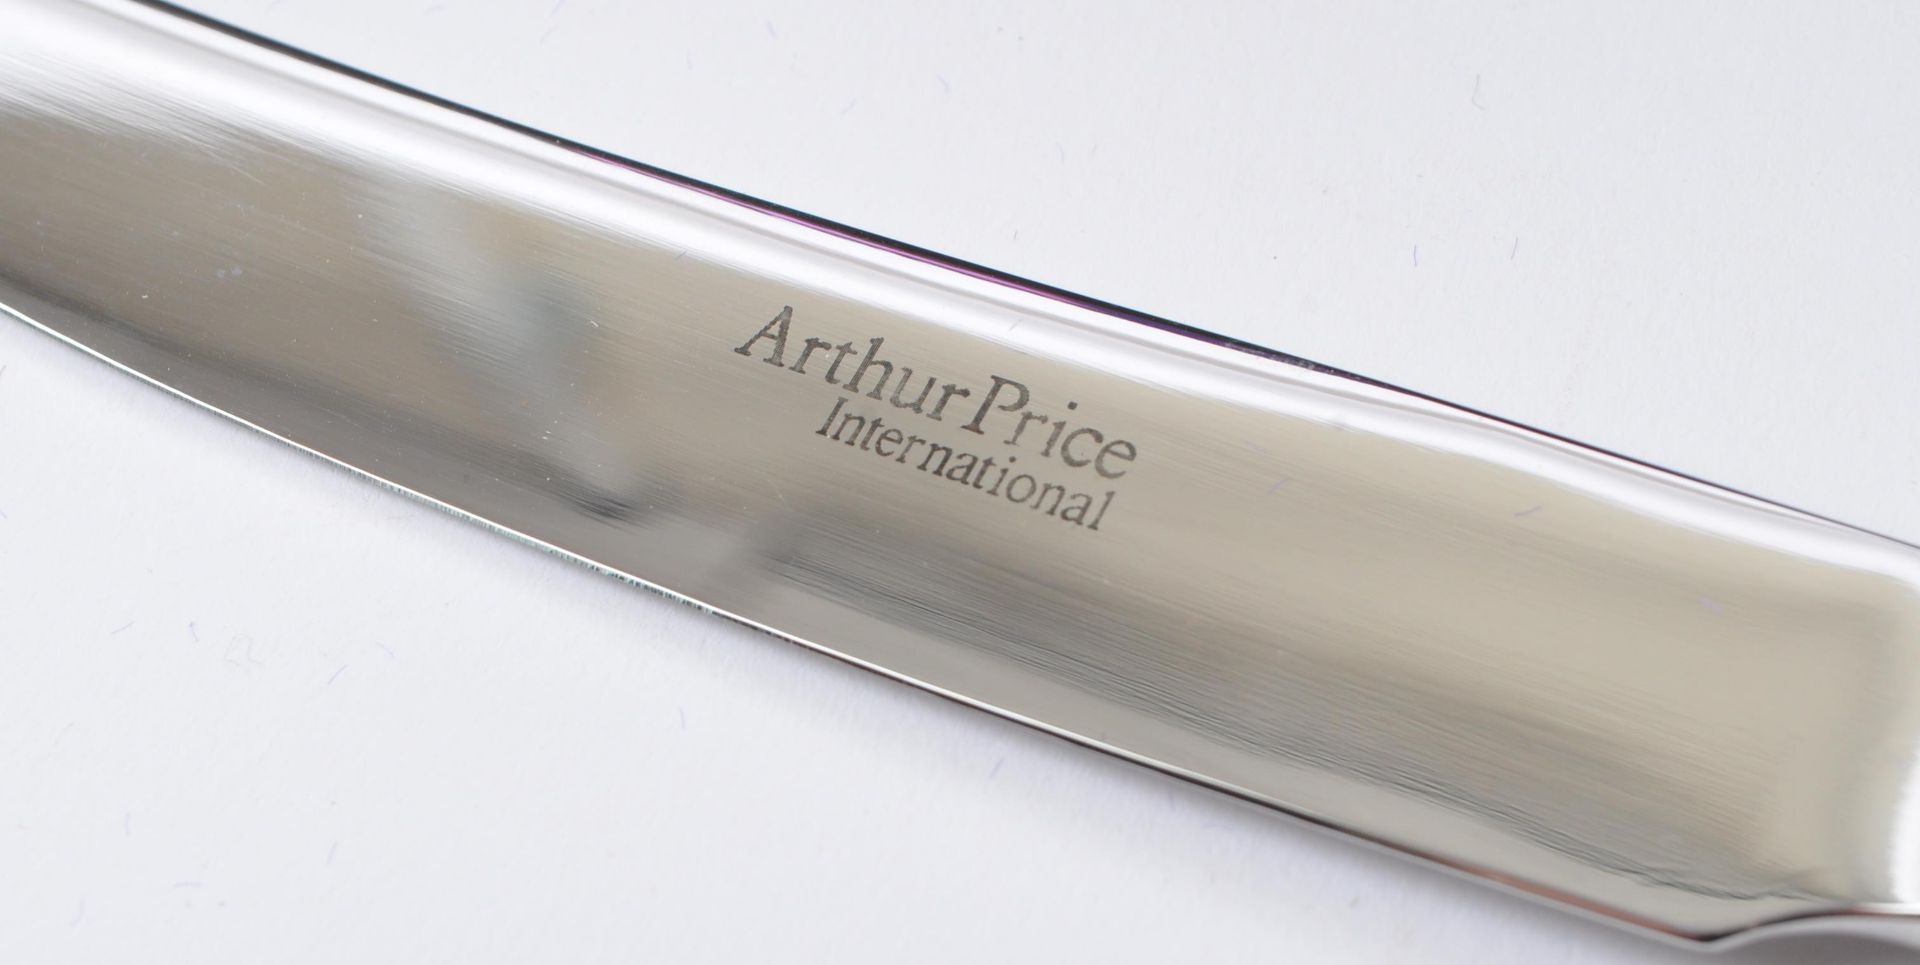 1970S STAINLESS STEEL CUTLERY SET BY ARTHUR PRICE INTERNATIONAL - Image 9 of 11